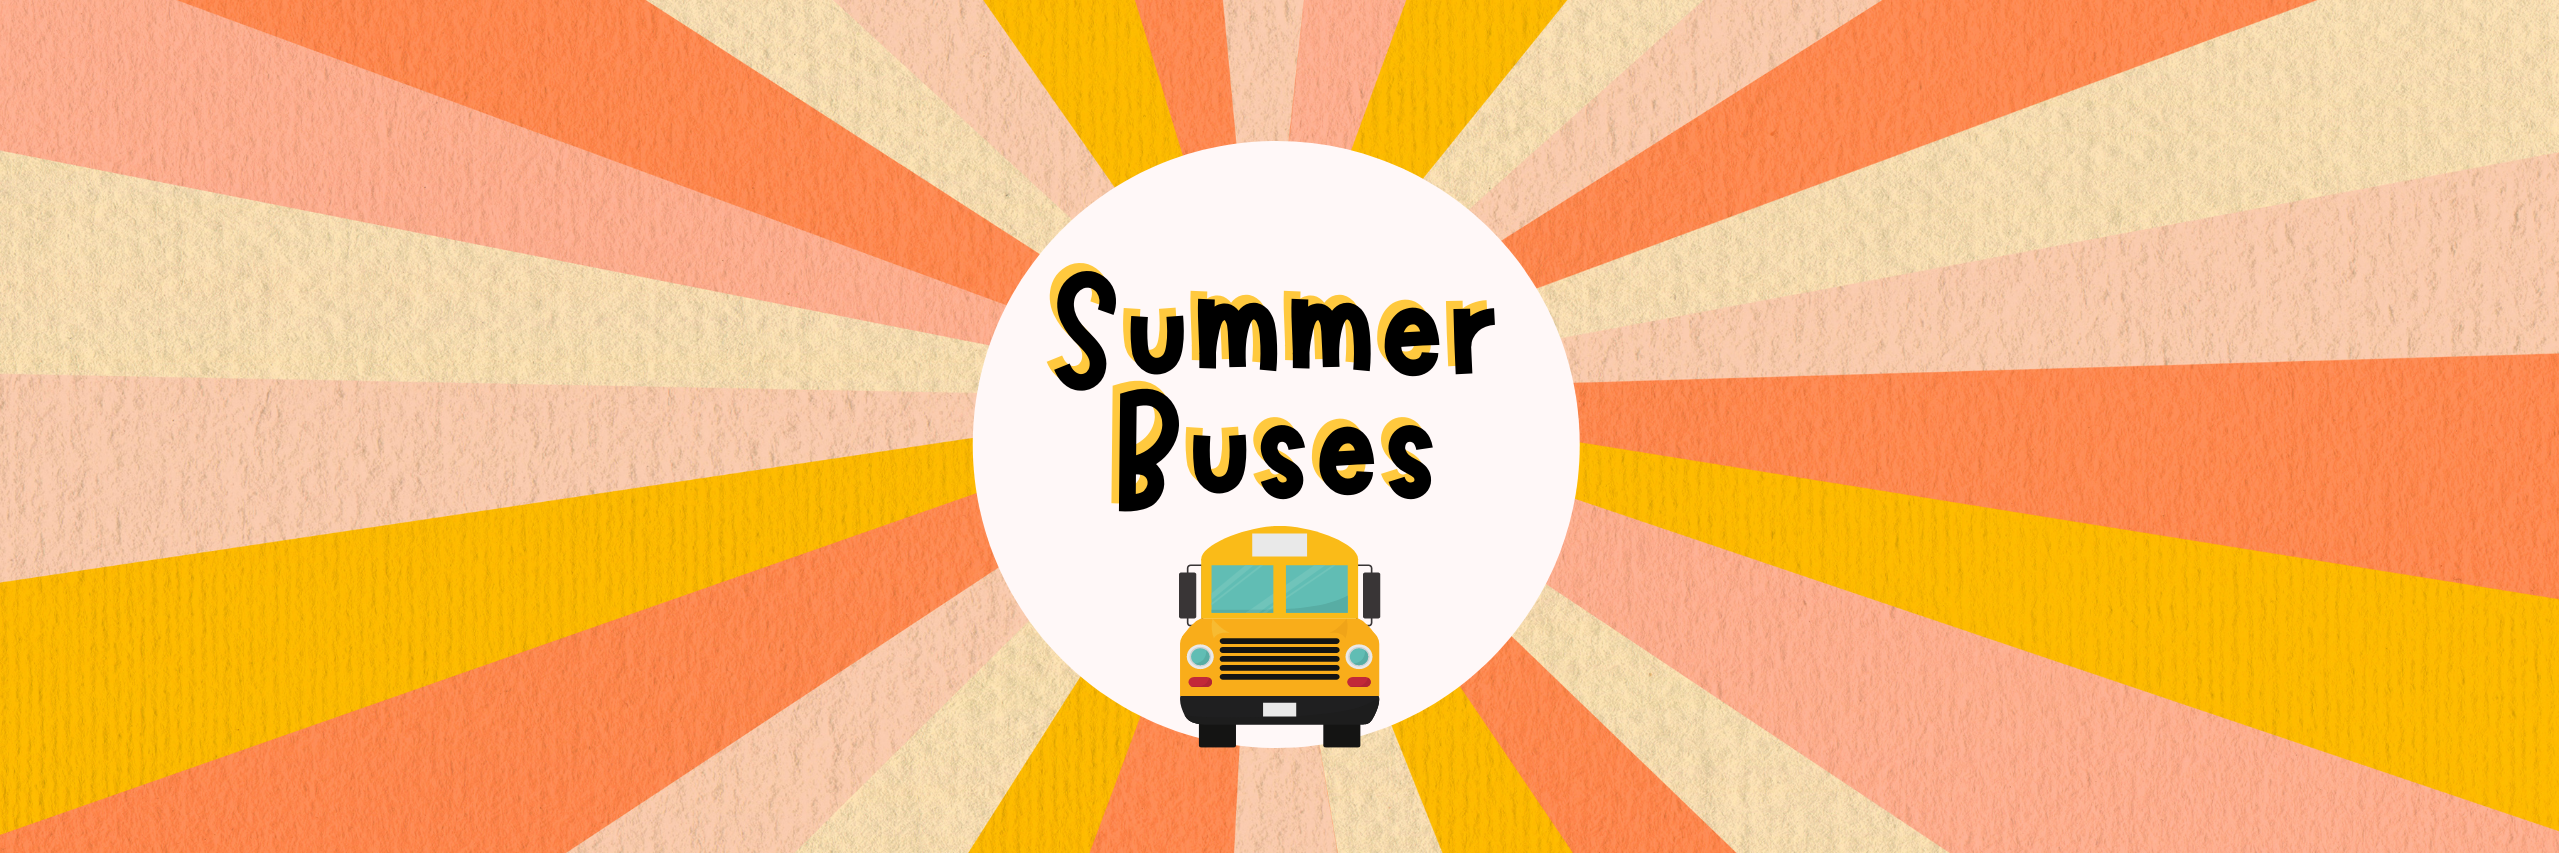 Summer Buses Graphic